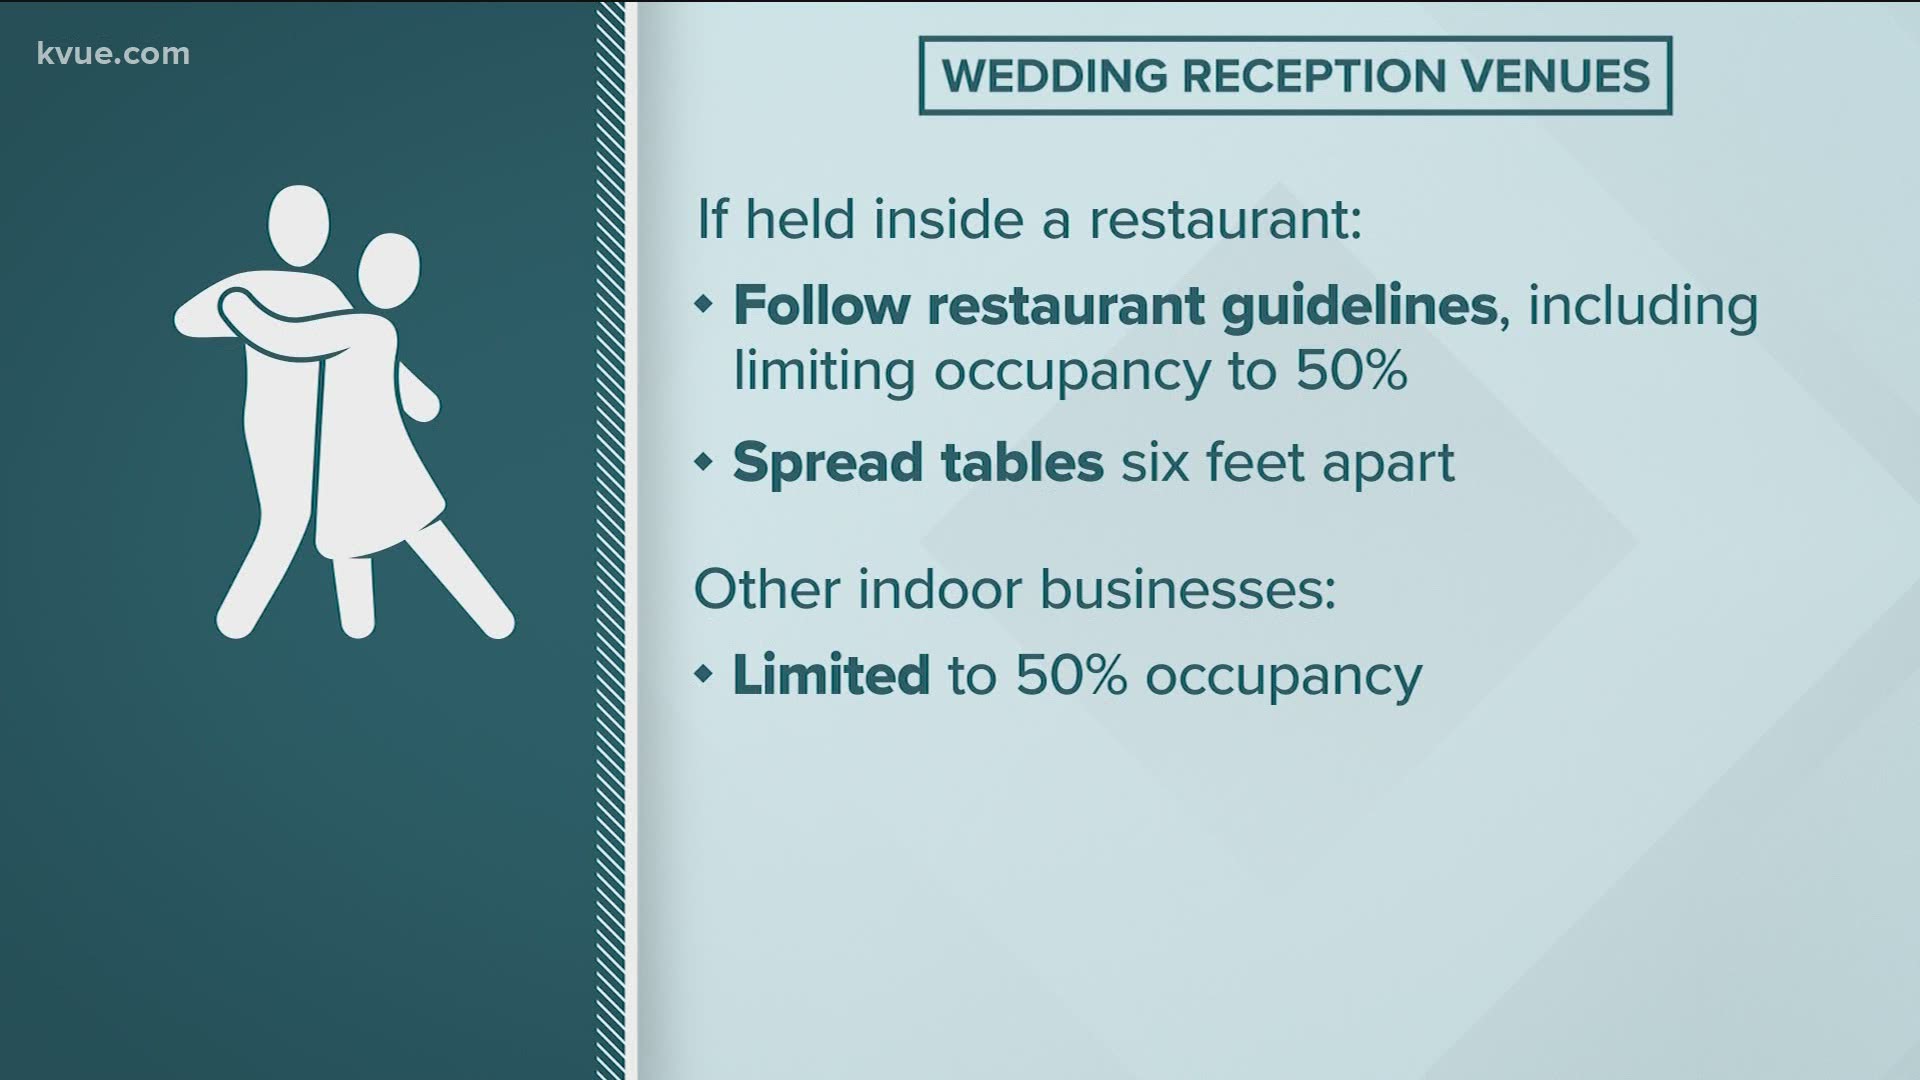 Austin's health authority put new rules in place to stop the spread of COVID-19 – and some are wondering how those will impact weddings.